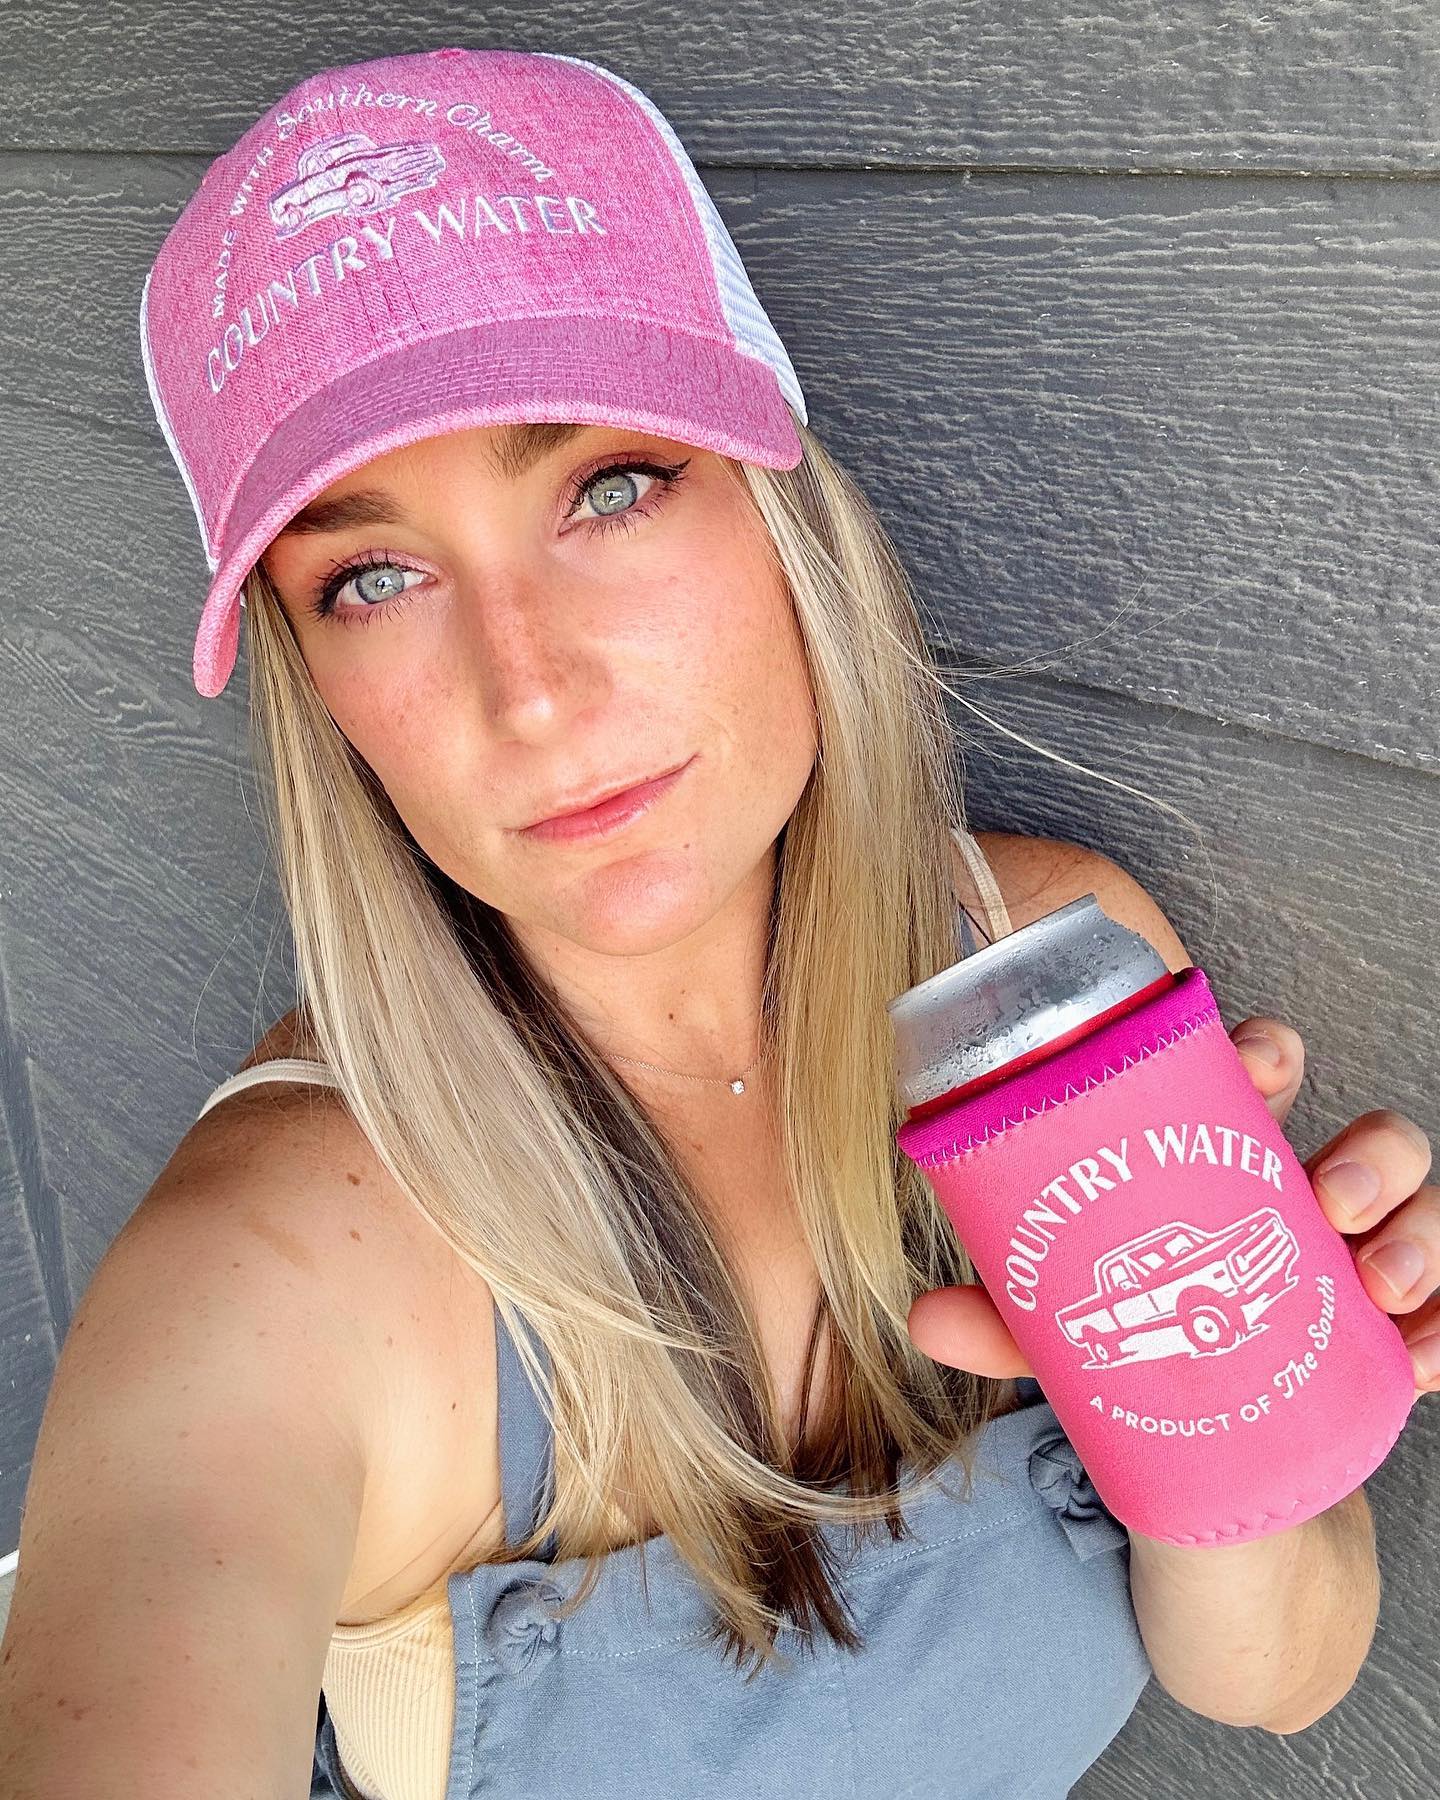 Country Water: Barbie Edition. Woman in pink hat, holding up a pink can of Country Water for a selfie